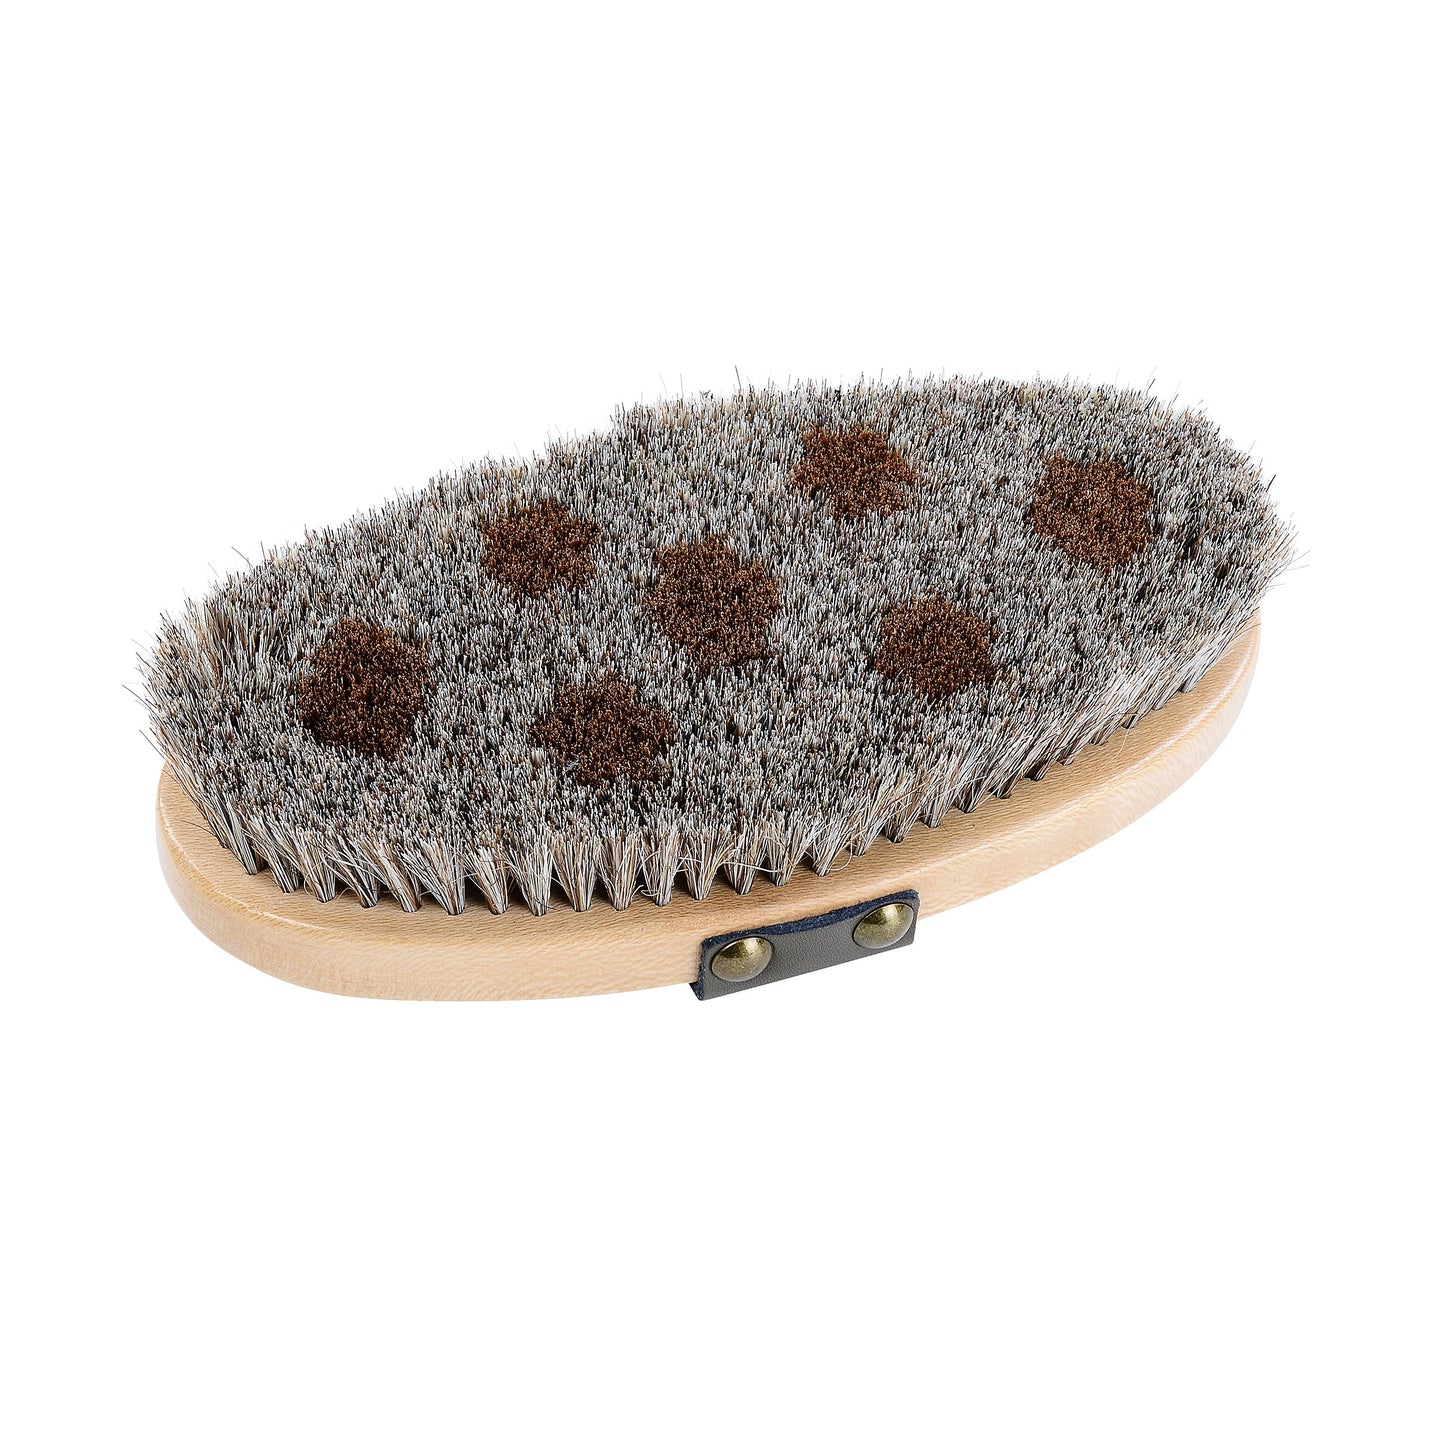 GeeGee COLLECTIVE | 'Fleck' Body Brush-Ippico Equestrian-The Equestrian